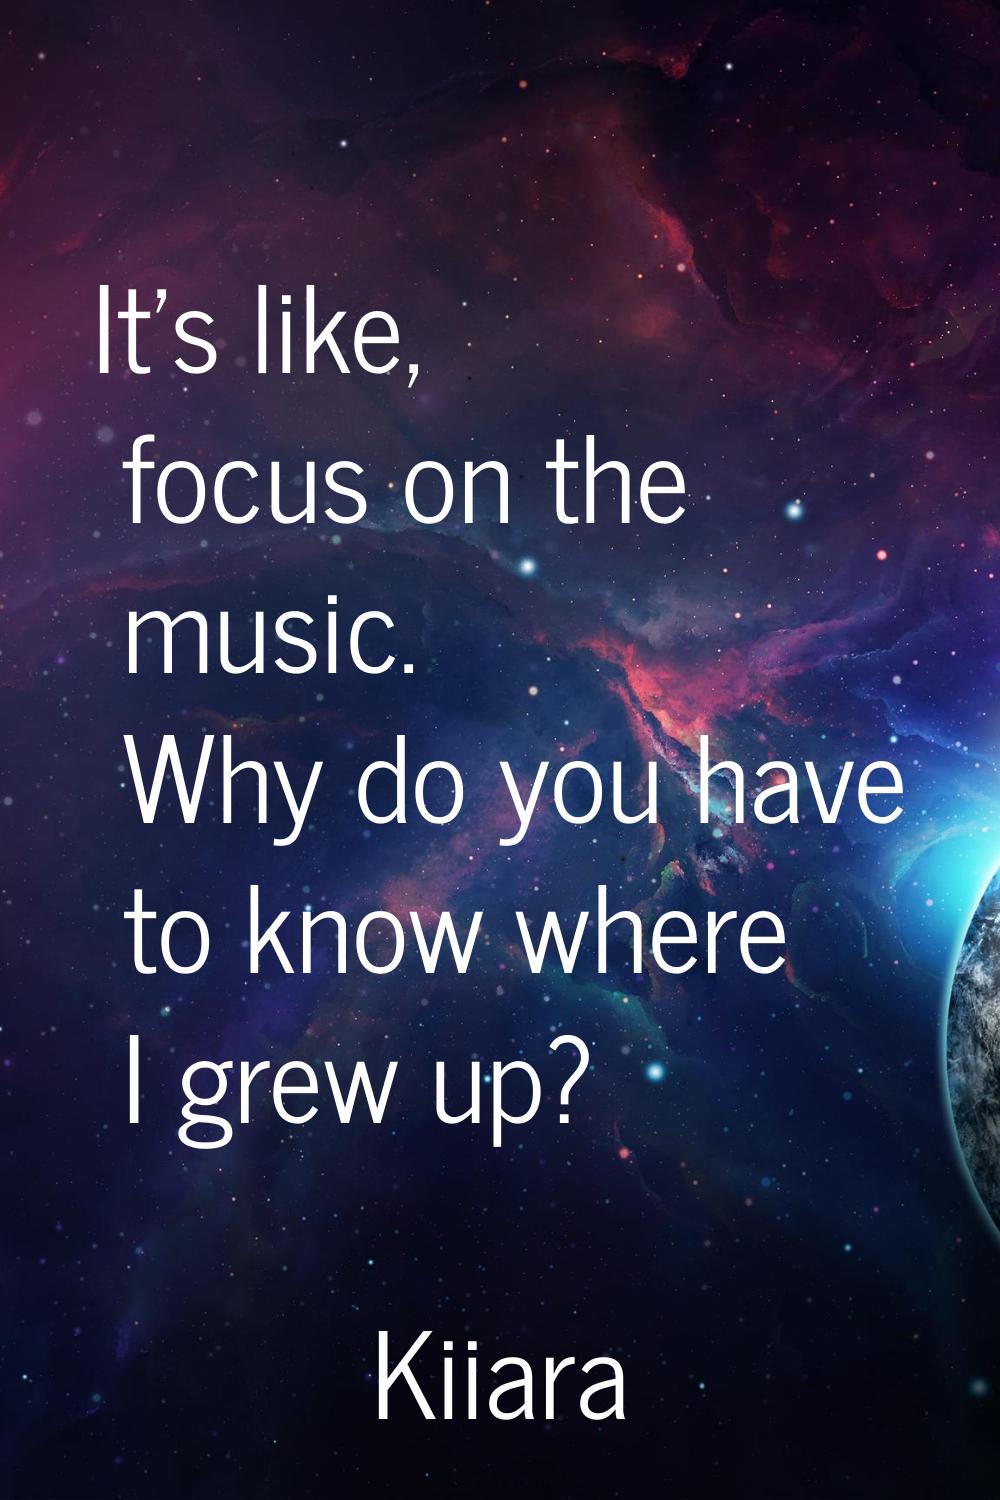 It's like, focus on the music. Why do you have to know where I grew up?